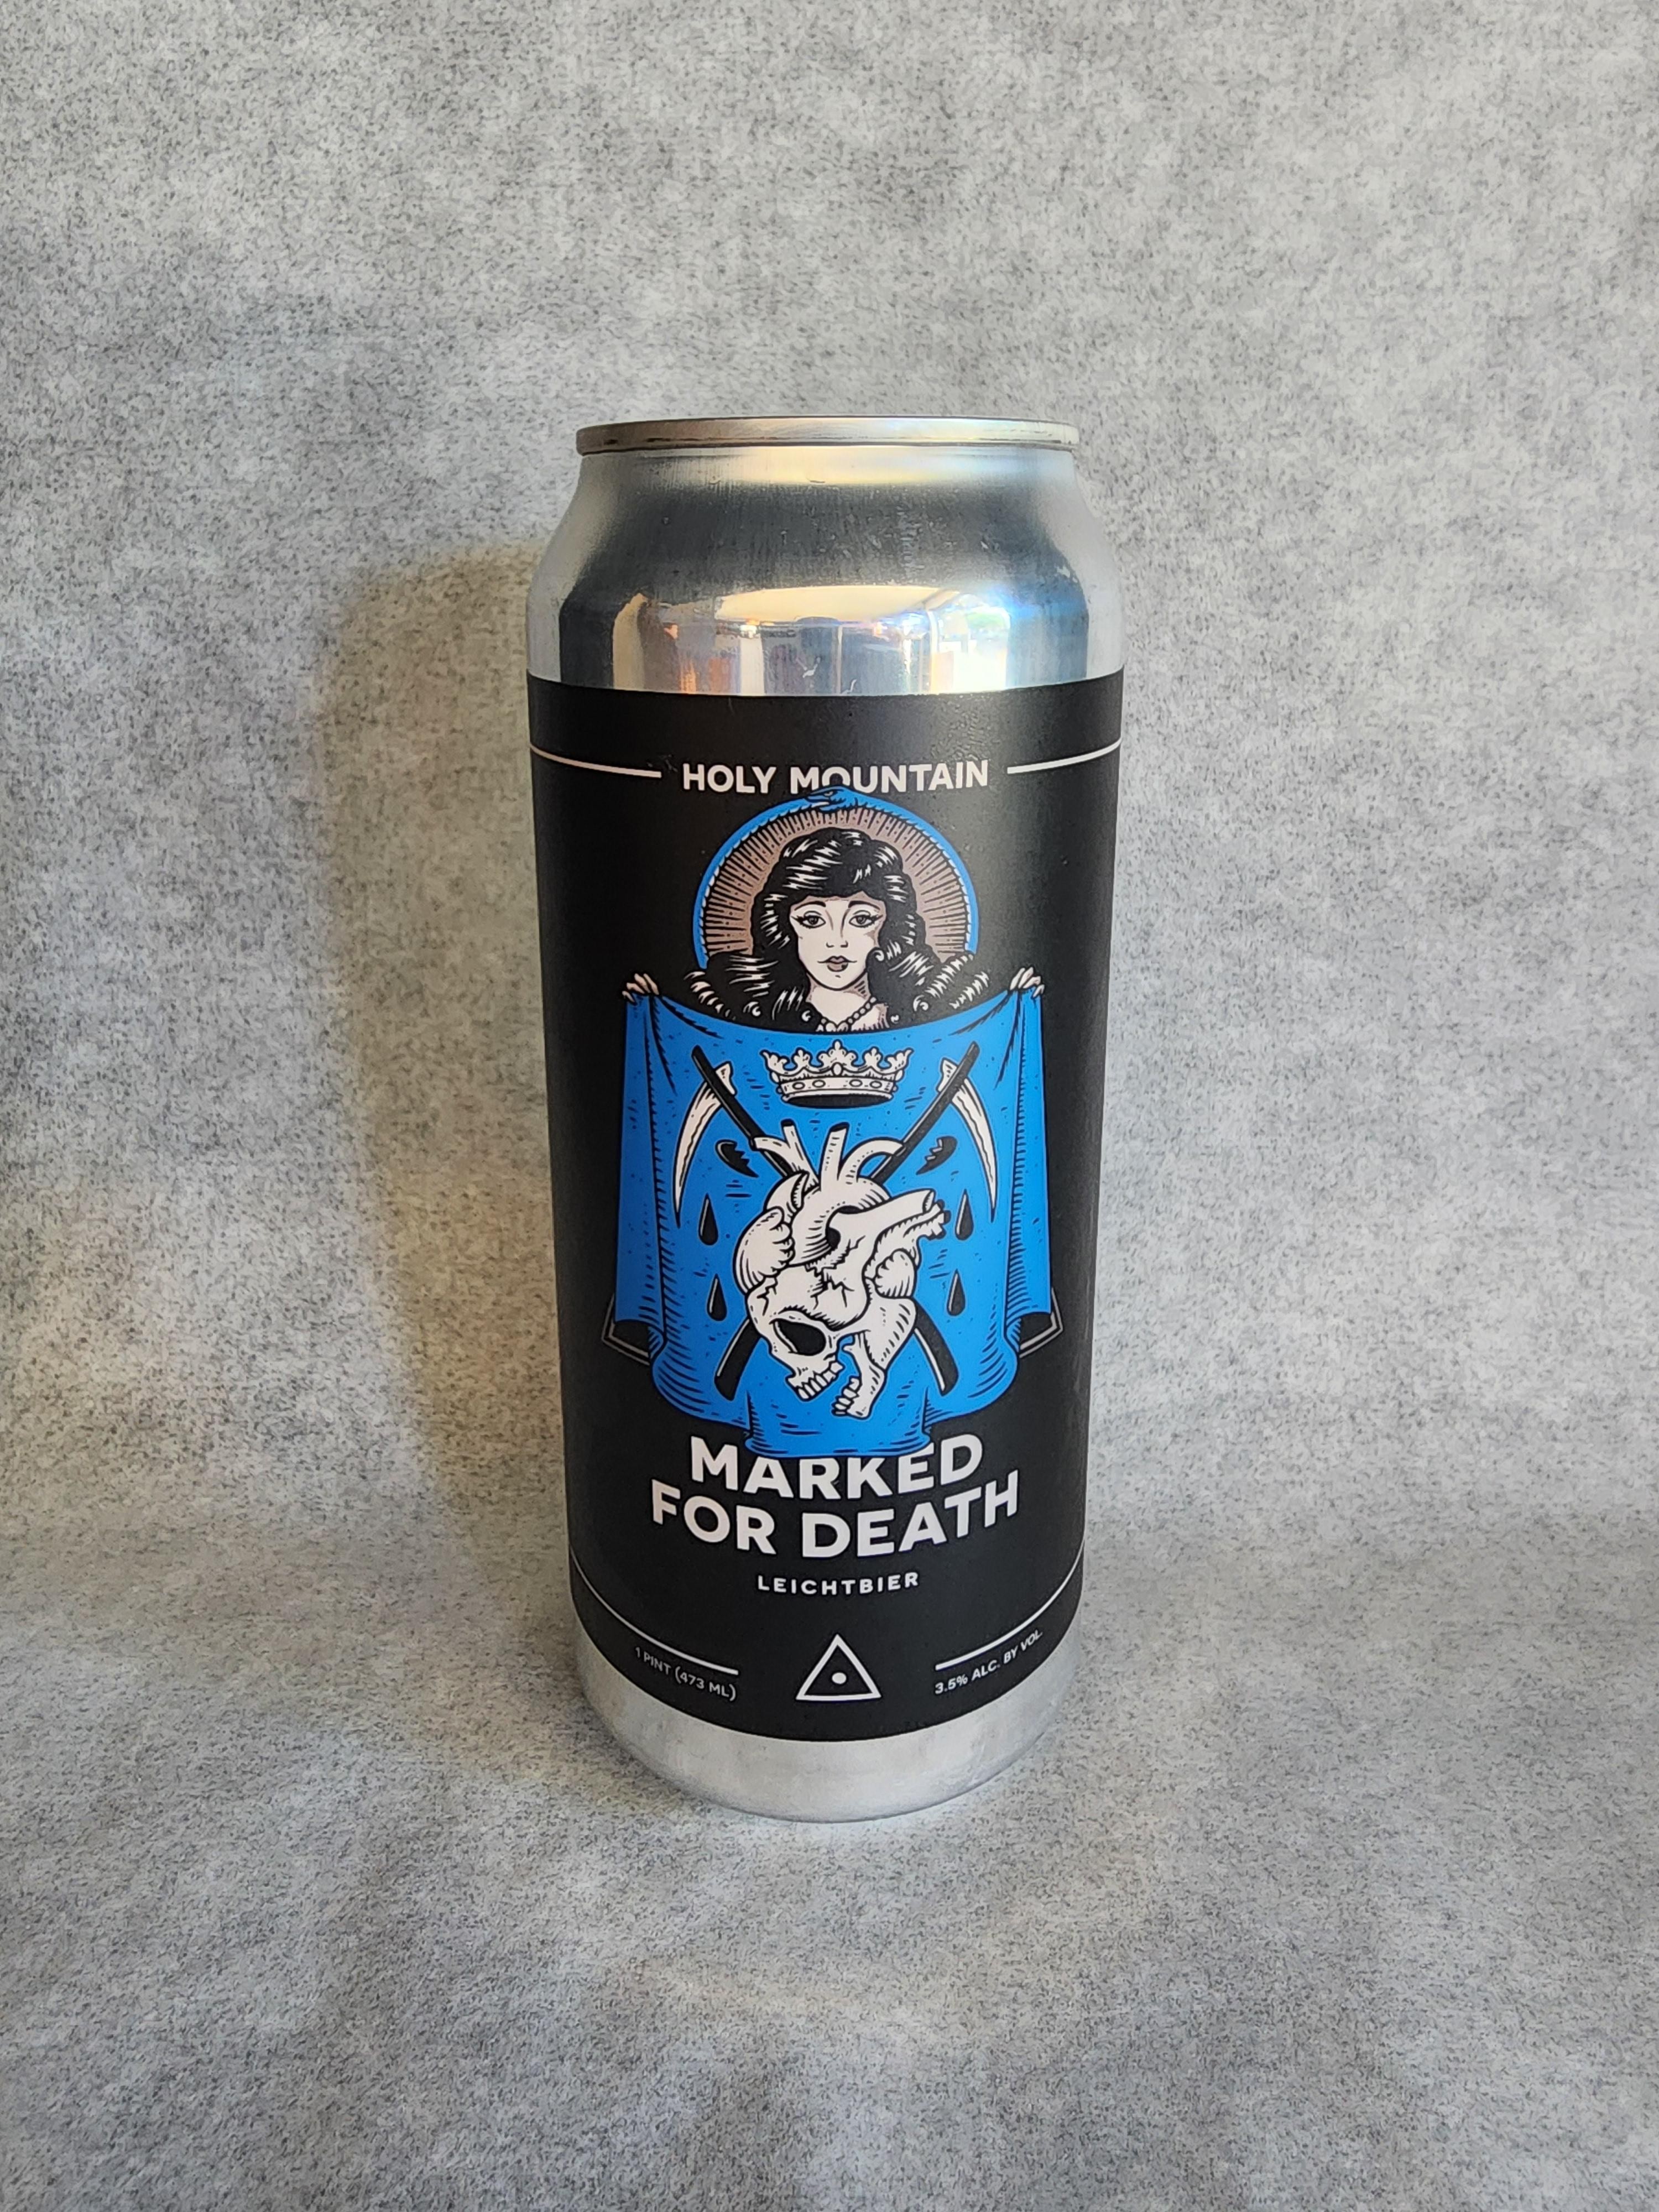 Holy Mountain Brewing Marked for Death Leightbier